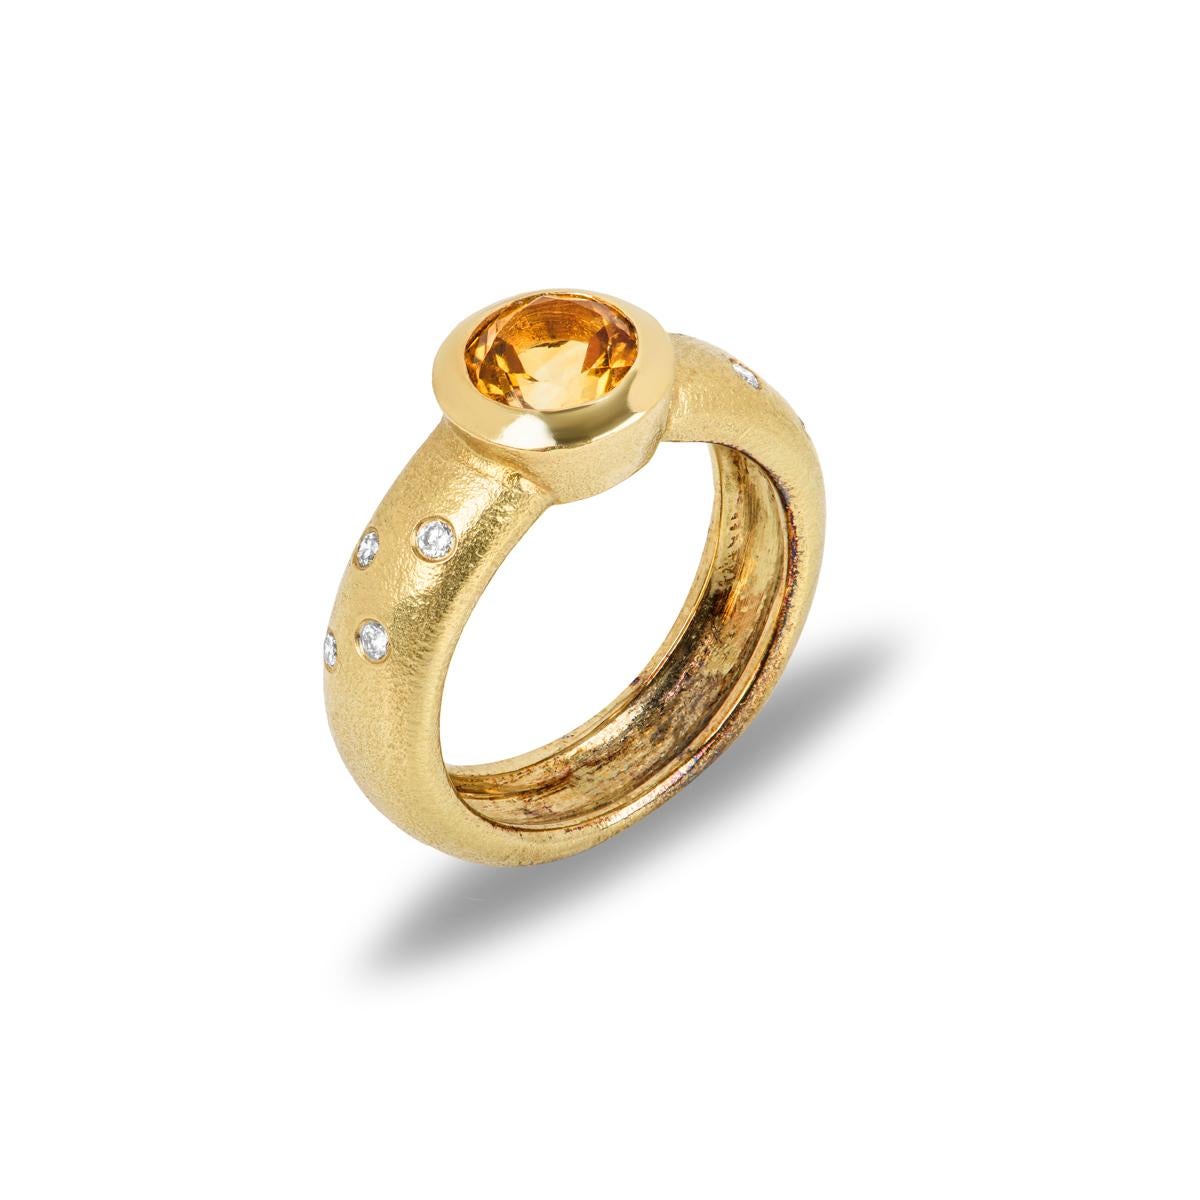 A modern 18k yellow gold citrine and diamond ring. The ring is set to the centre with a round cut citrine in a rubover setting, weighing approximately 1.15ct. Further complementing the citrine are 4 diamonds set to either side with an approximate